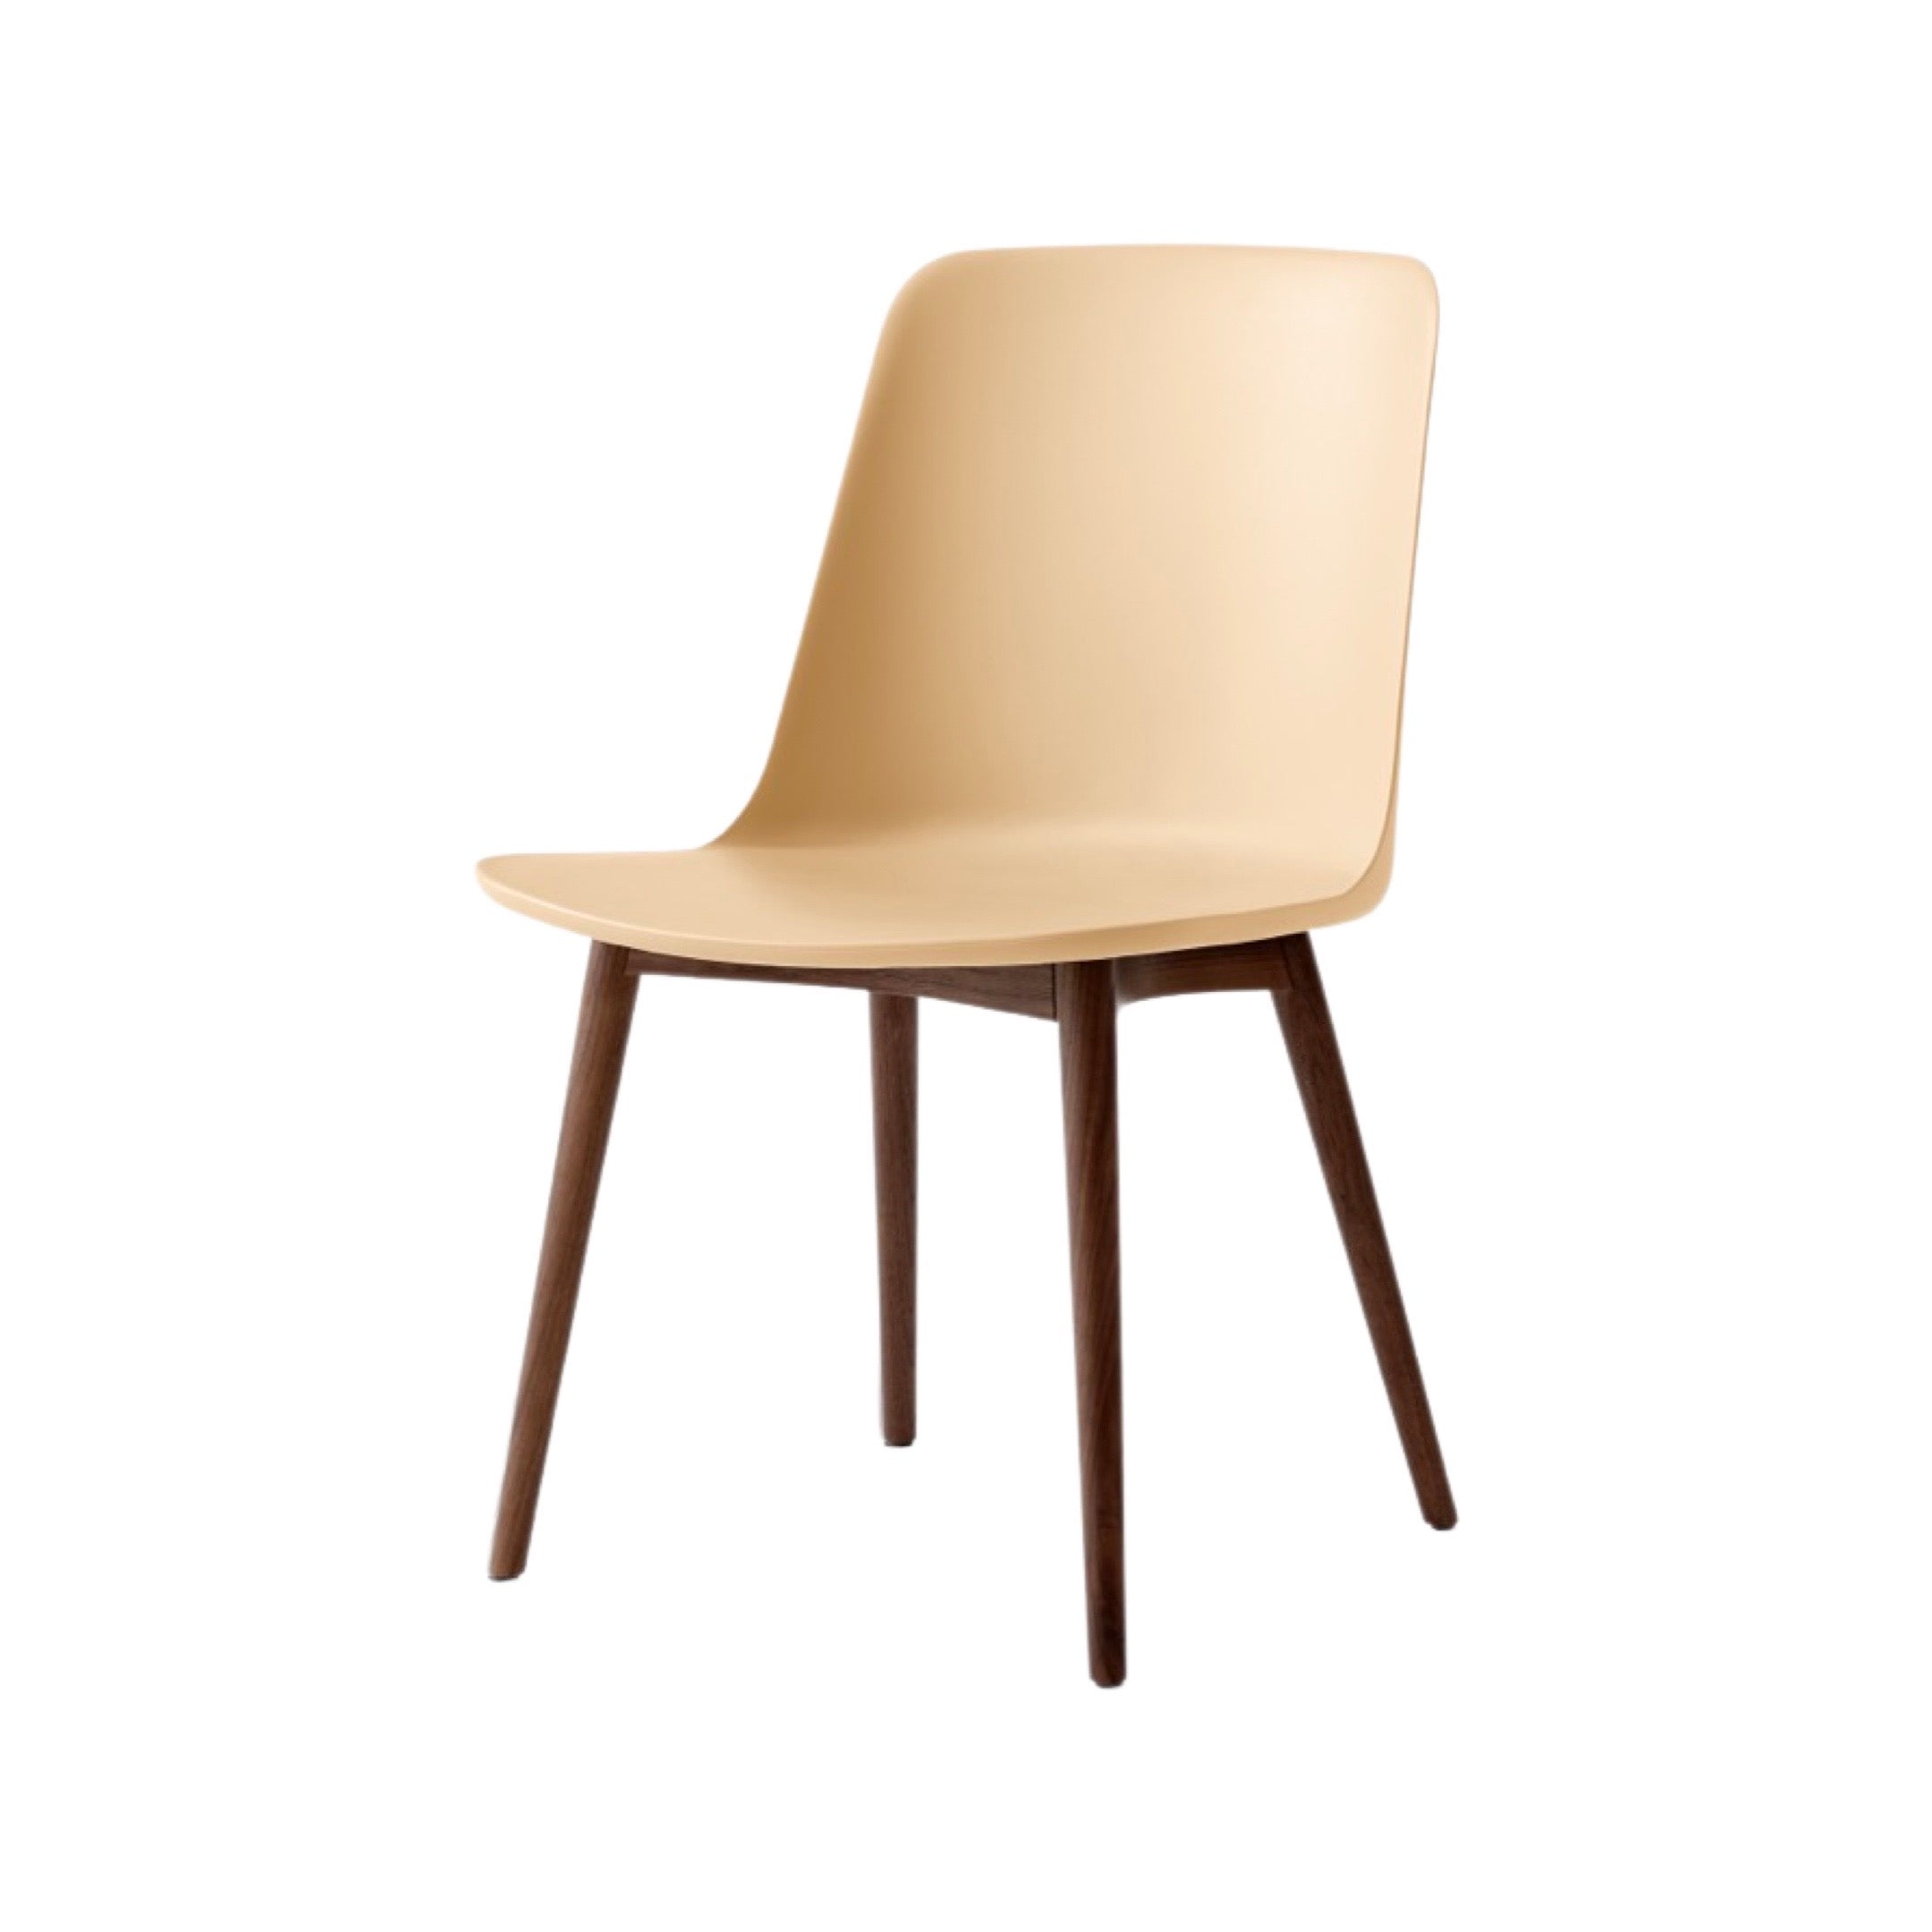 &Tradition Rely Chair - HW71